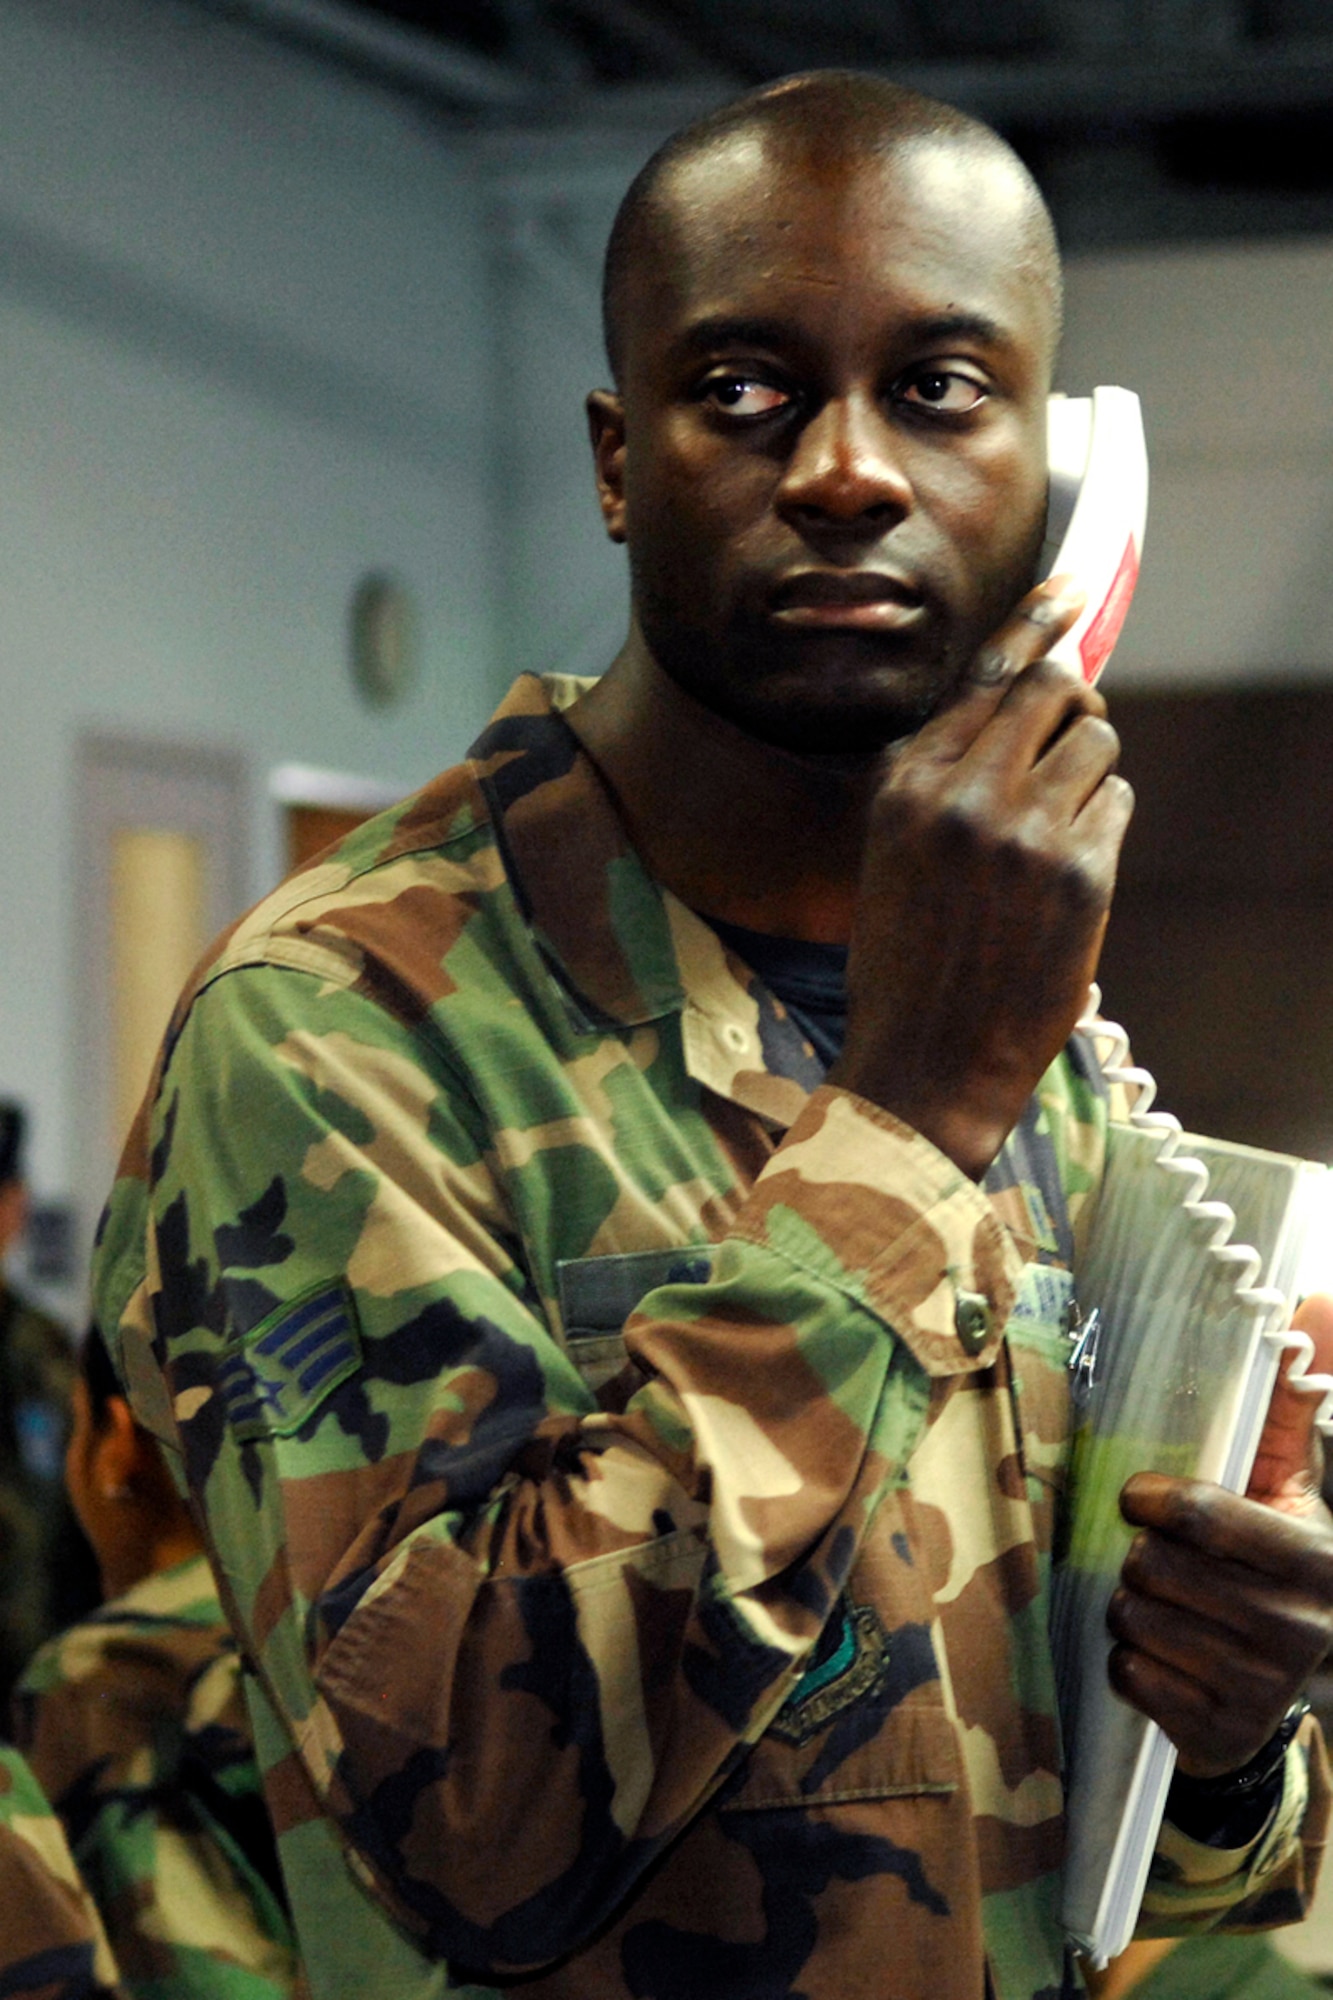 Senior Airman Evans Opoku, 66th Medical Operations Squadron, makes a phone call during the Personnel Deployment Function line processing during Hanscom's Operational Readiness Inspection. The ORI began on June 7 and ran until June 18. (US Air Force photo by Linda LaBonte Britt)